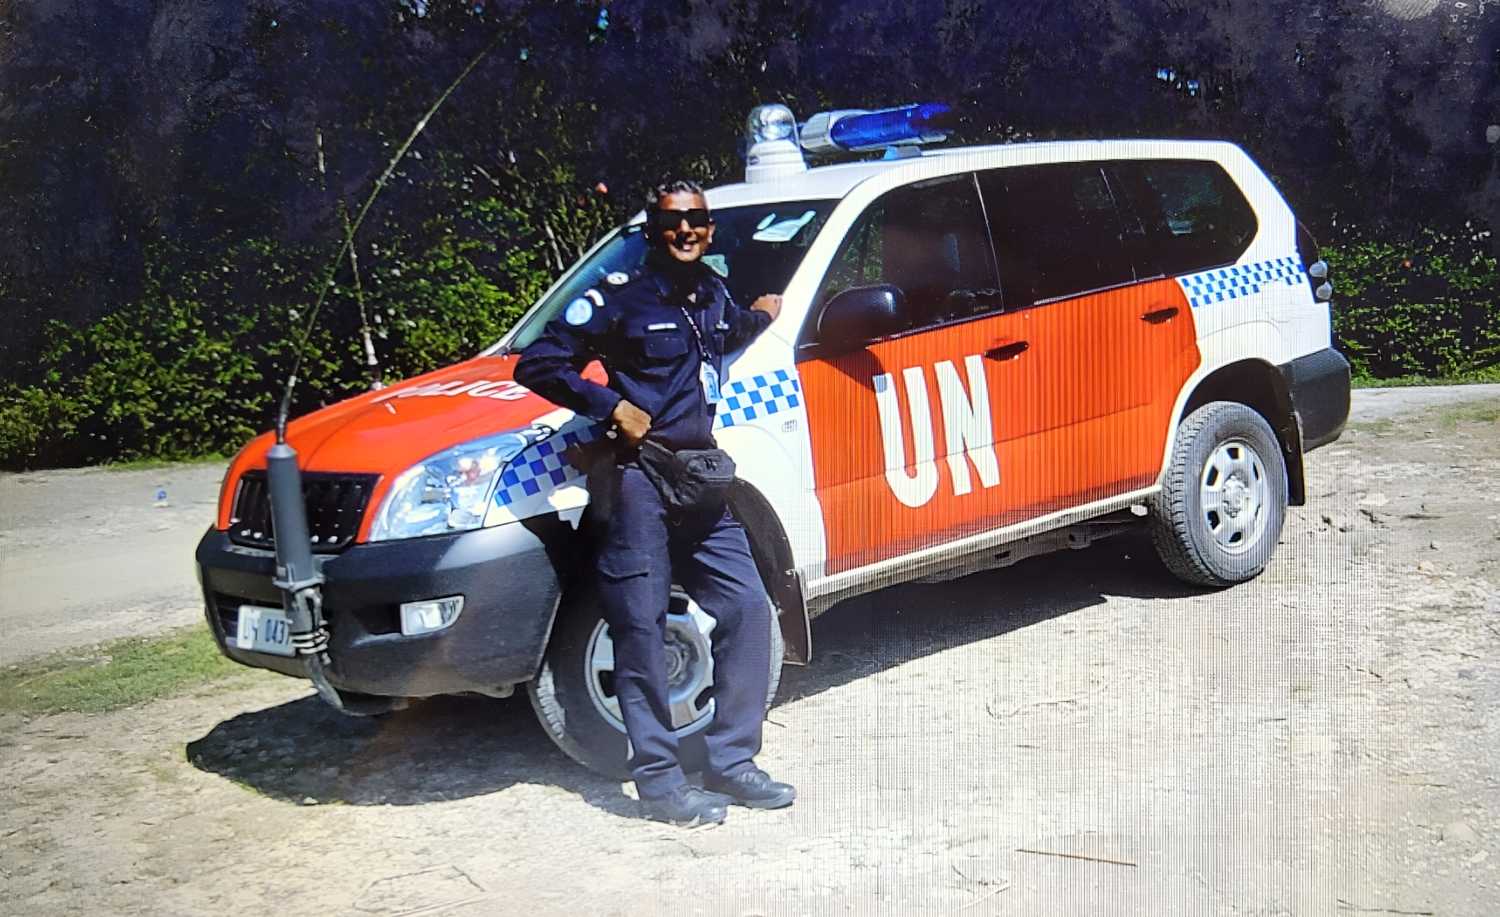 DSP Singh standing infront of a UN vehicle. Car is white, hatchback, with a big orange paint on its side only, with the letters "UN" in white decal